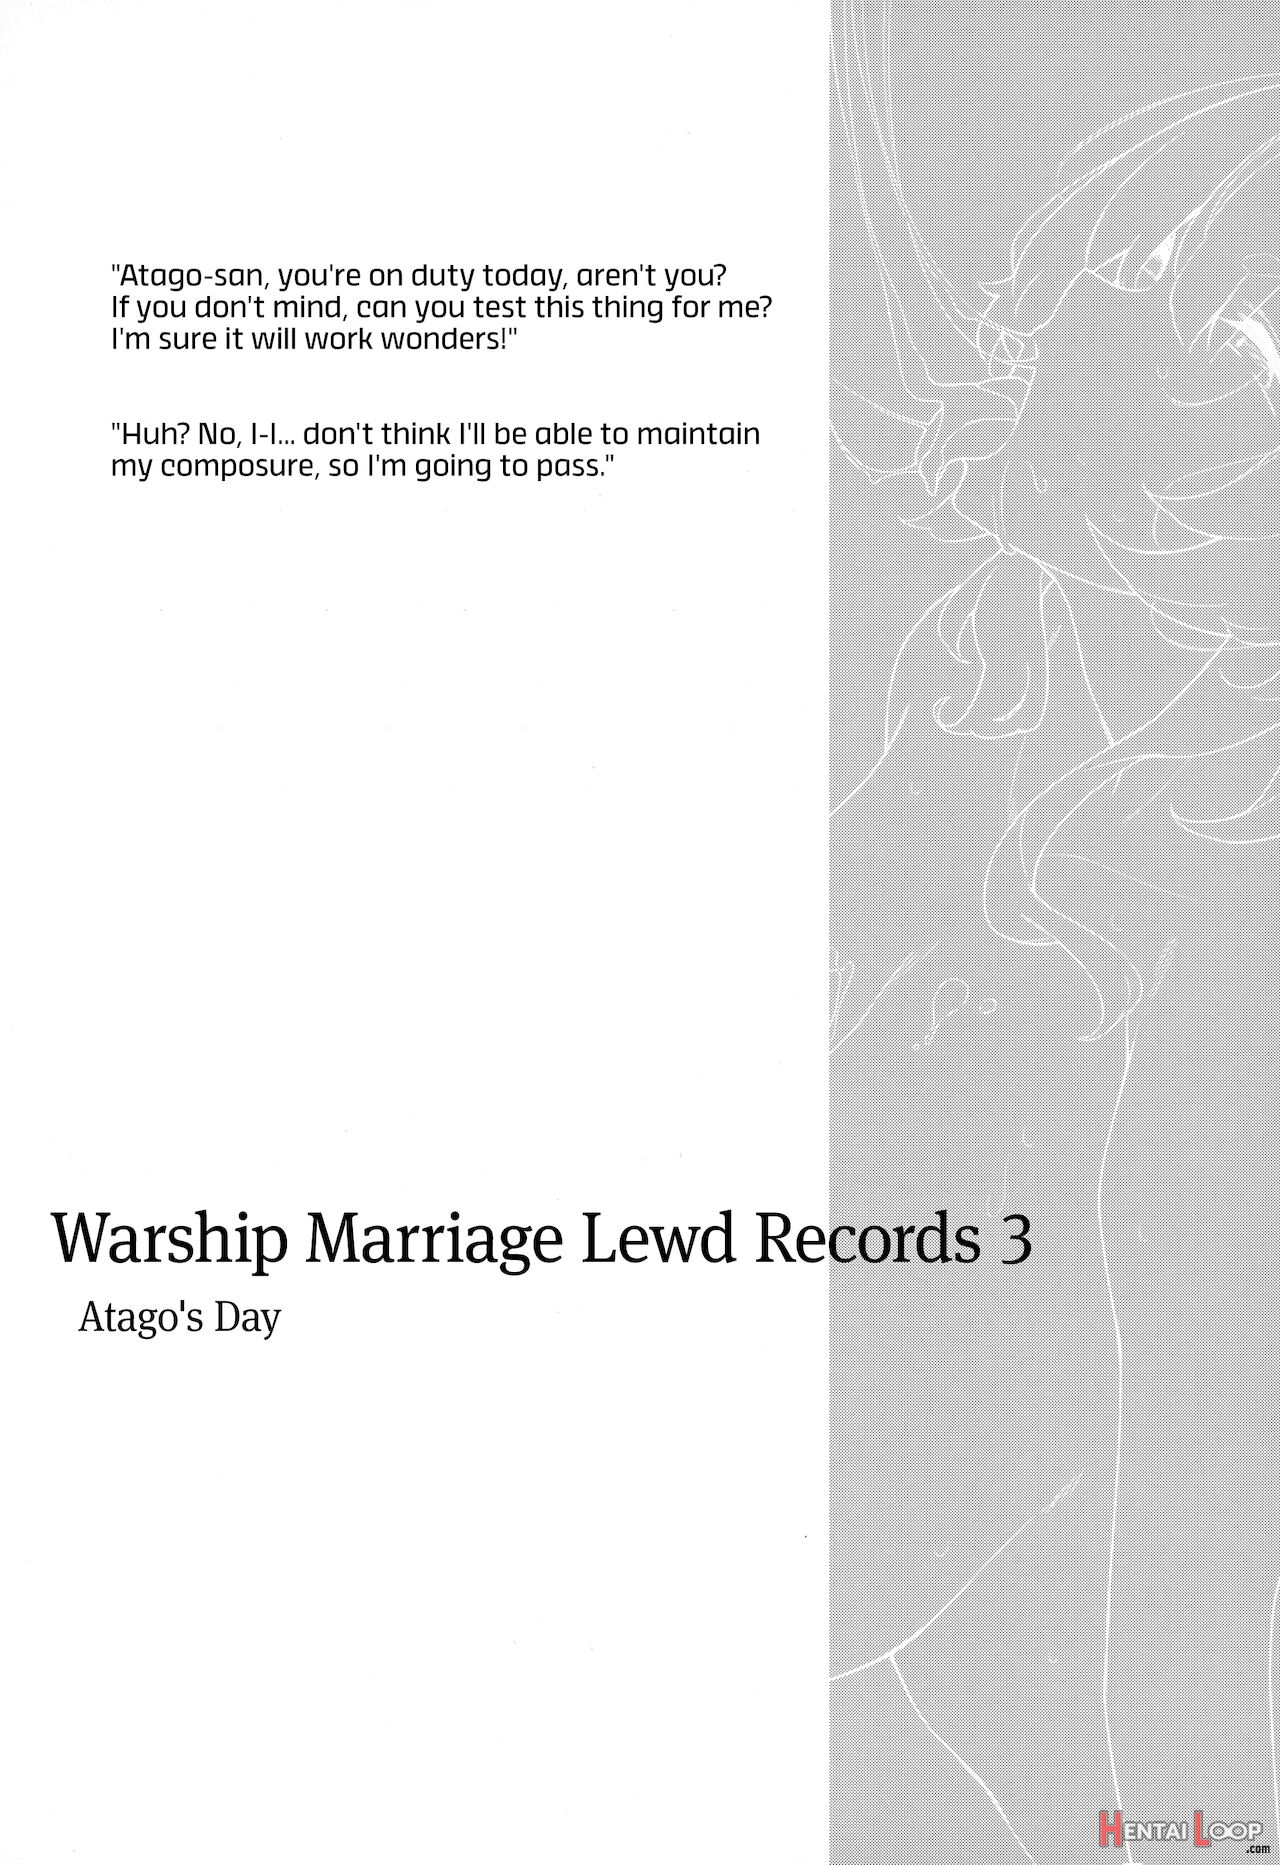 Warship Marriage Lewd Records 3 page 4